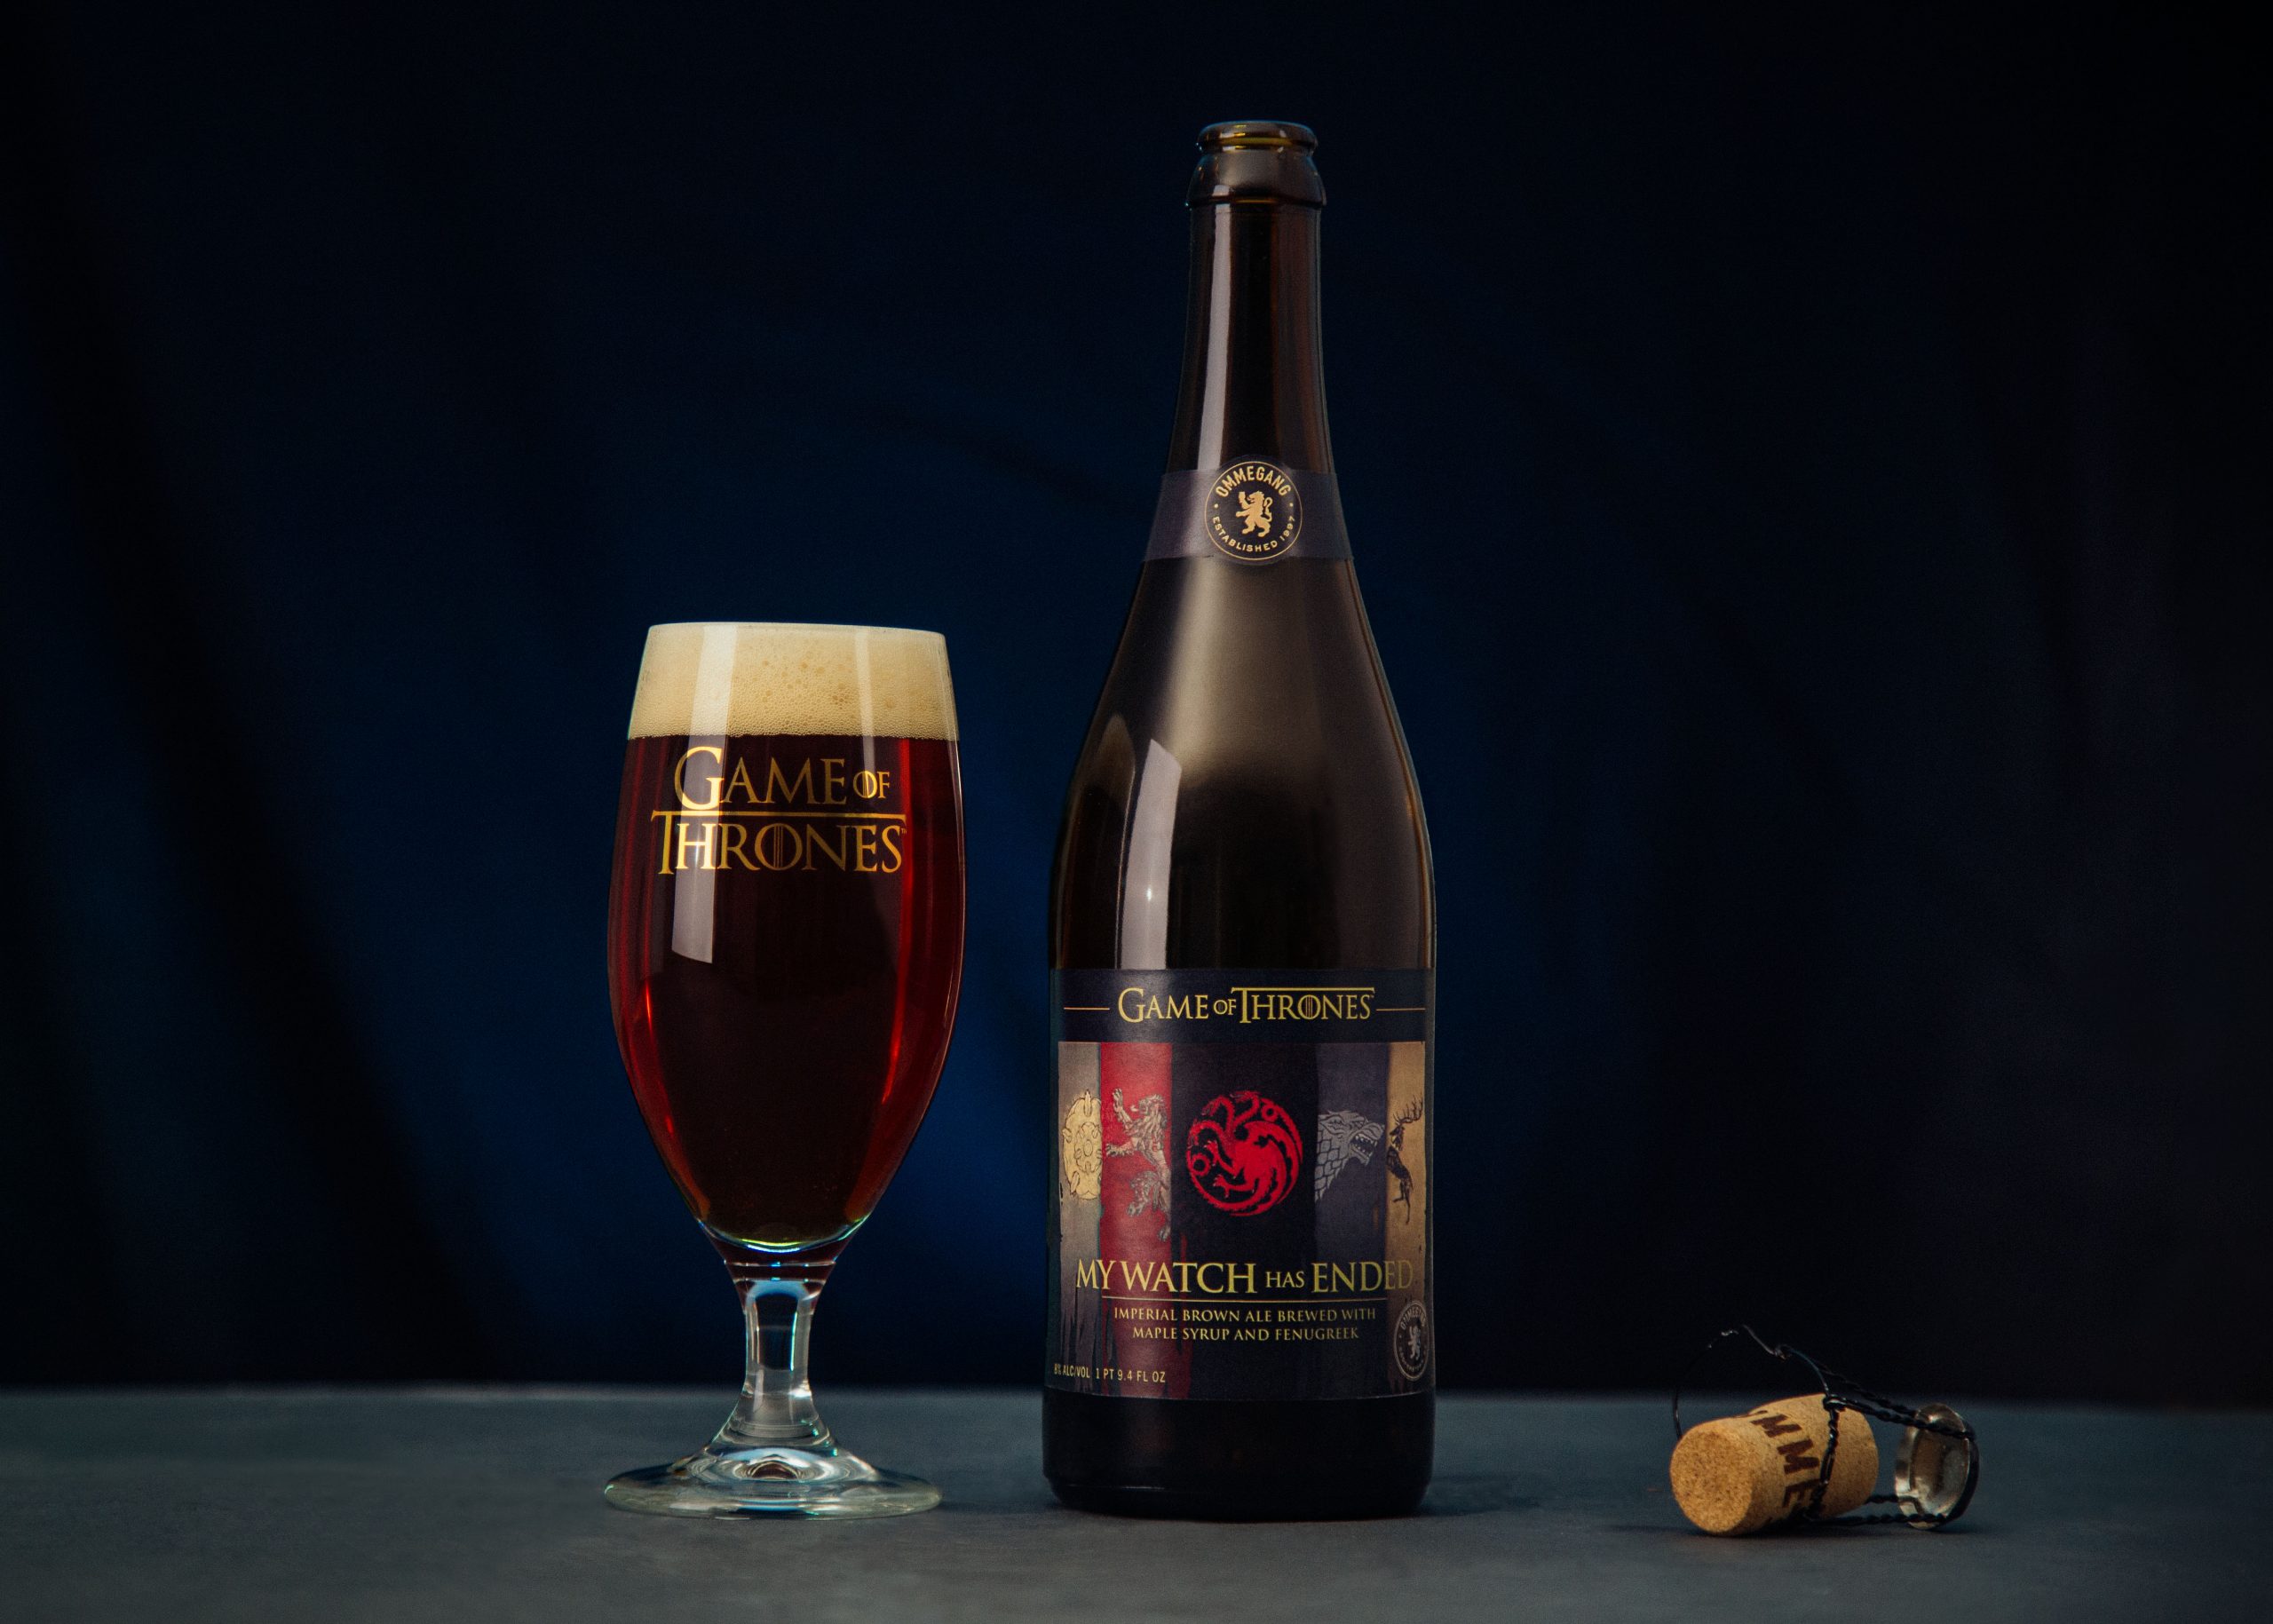 Game of Thrones: My Watch Has Ended by Brewery Ommegang